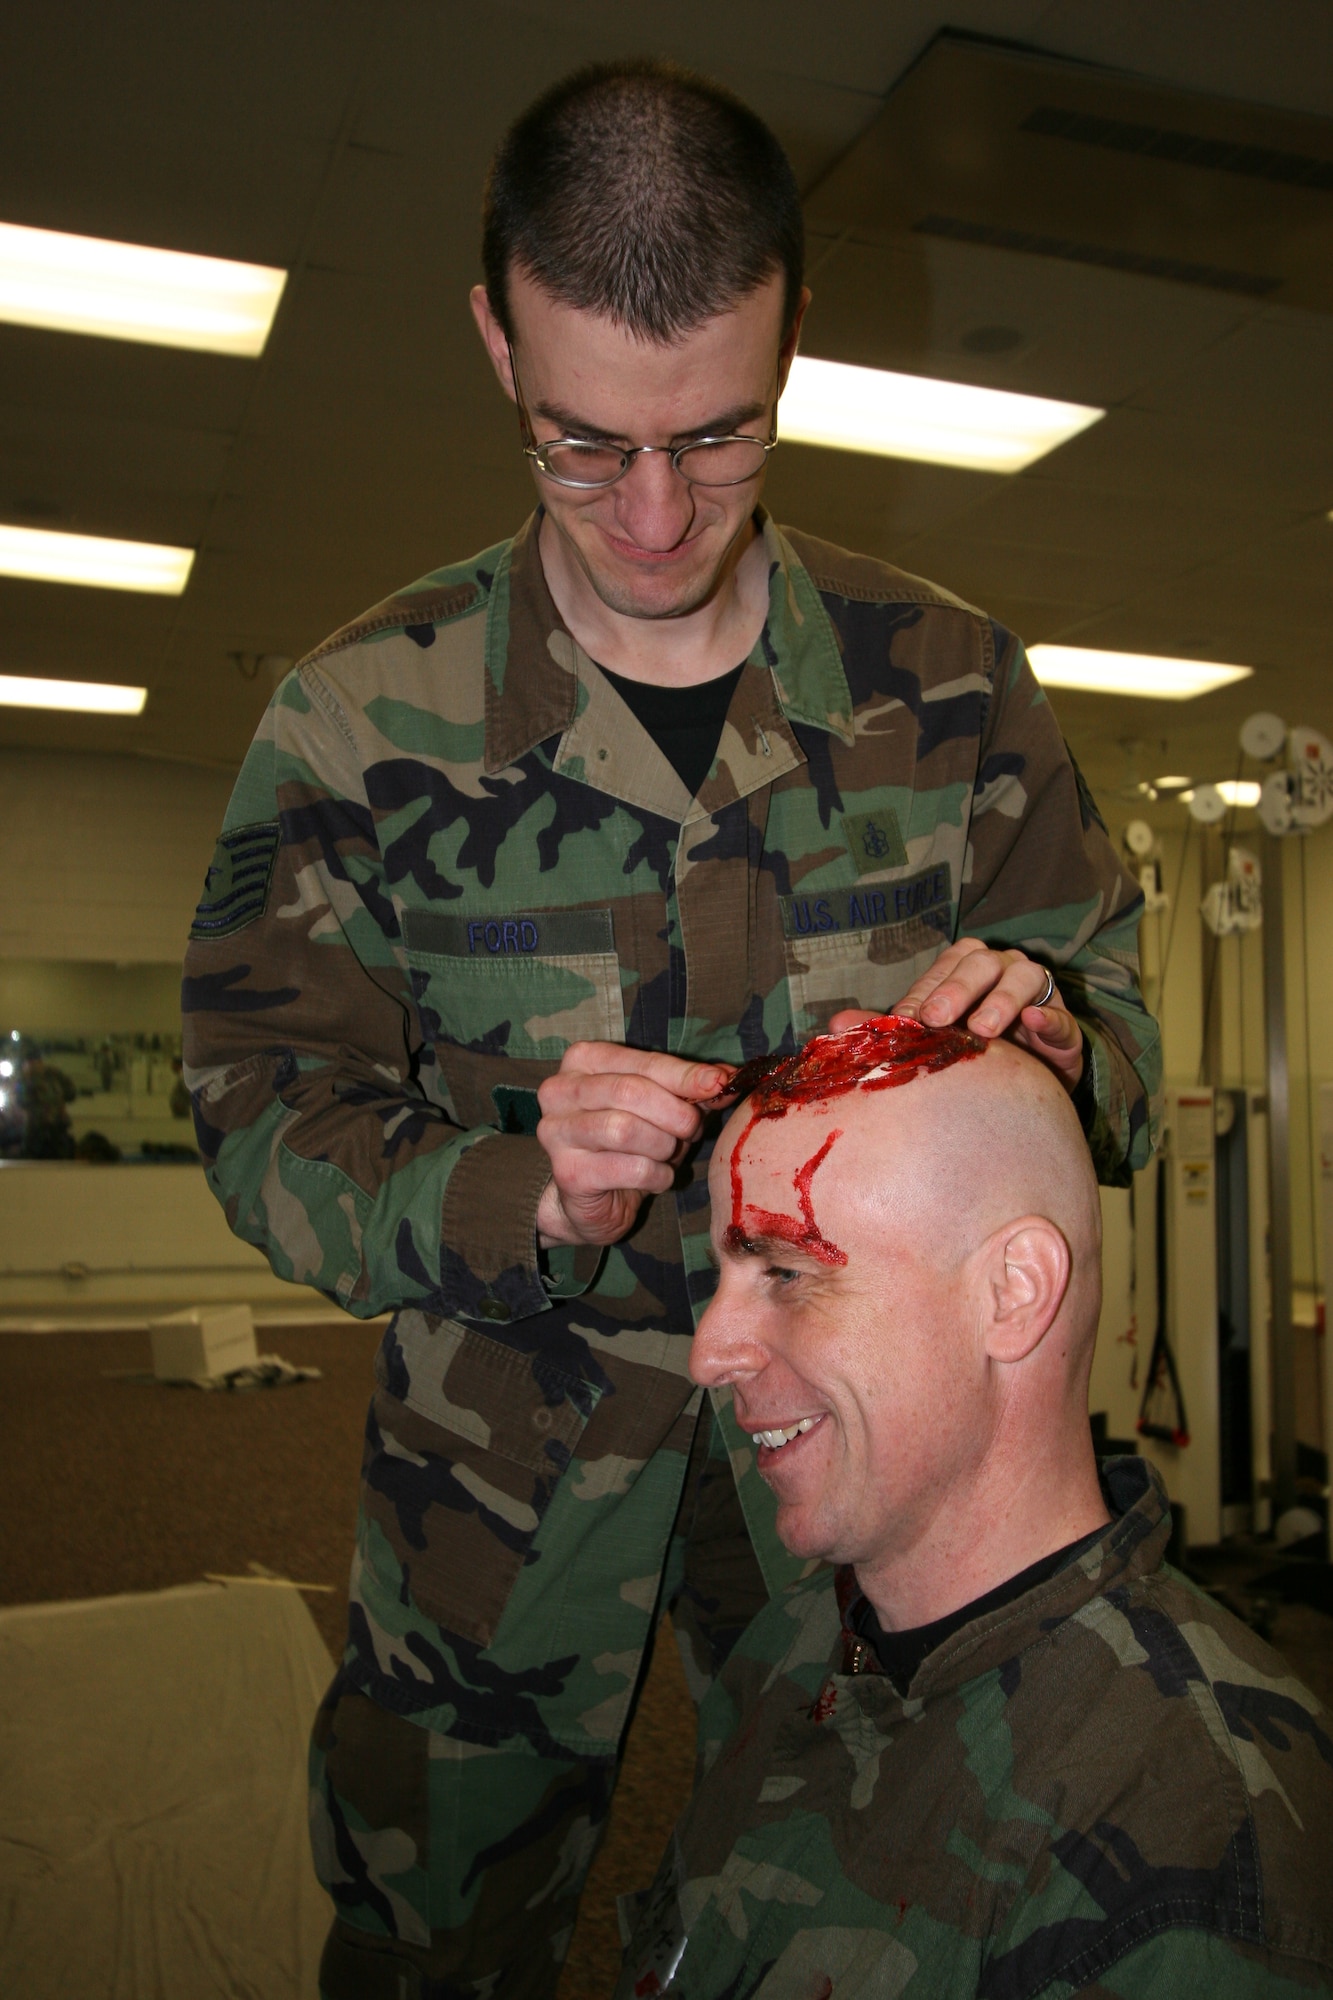 Tech. Sgt. John Ford, 75th Medical Group, creates a head wound on Capt. Michael Alfaro, 75th Dental Squadron, for a readiness exercise held in March. (U.S. Air Force photo by Beth Young)